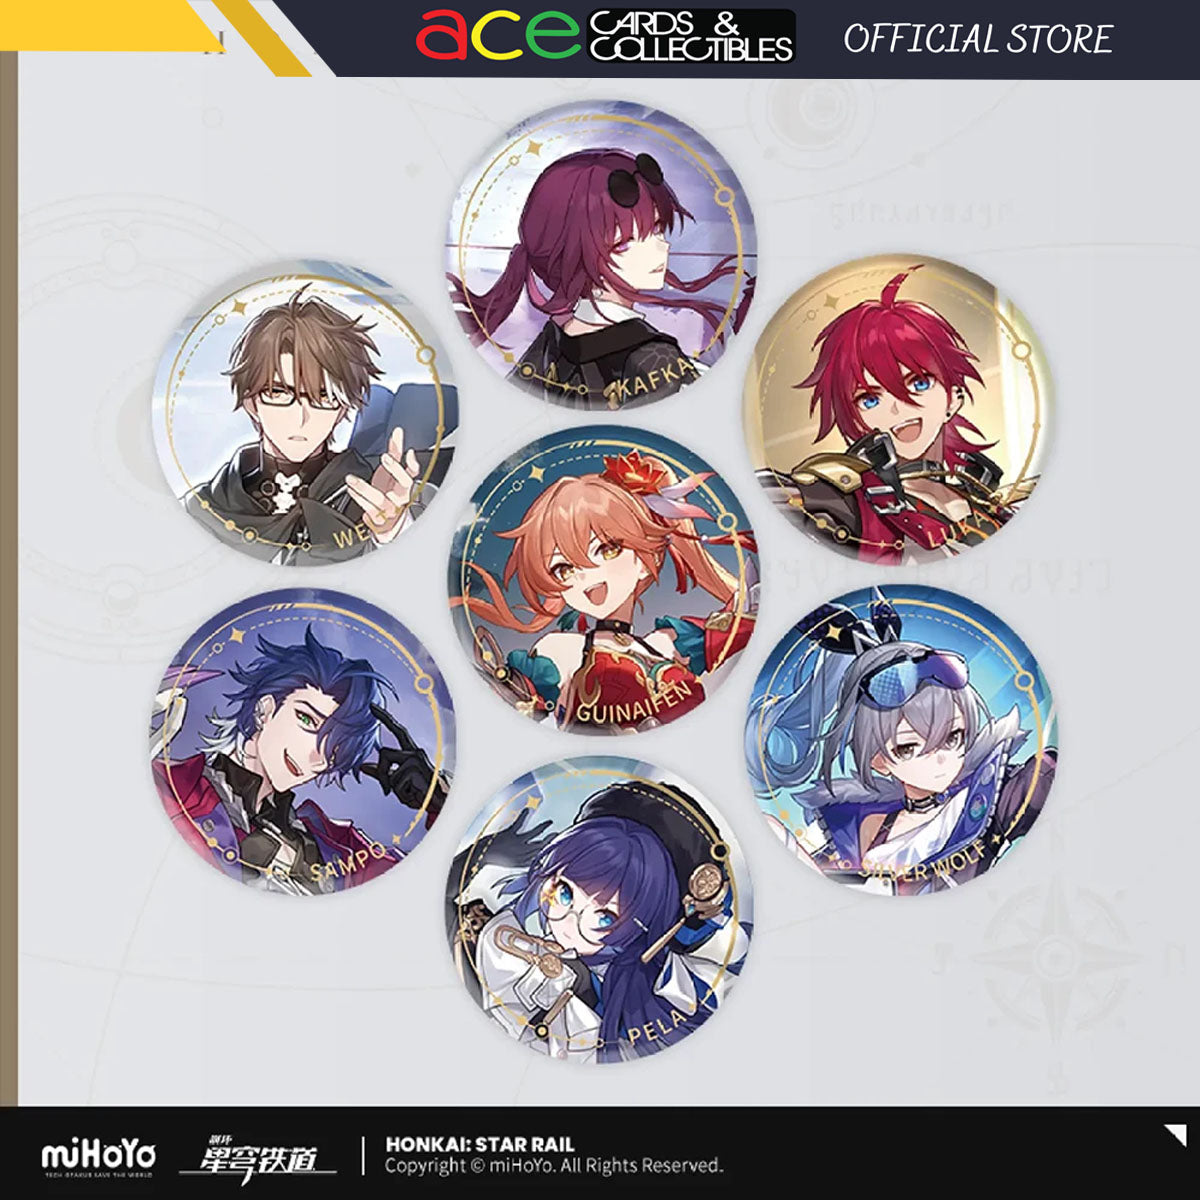 Honkai: Star Rail Character Badge "The Nihility"-Guinaifen-miHoYo-Ace Cards & Collectibles